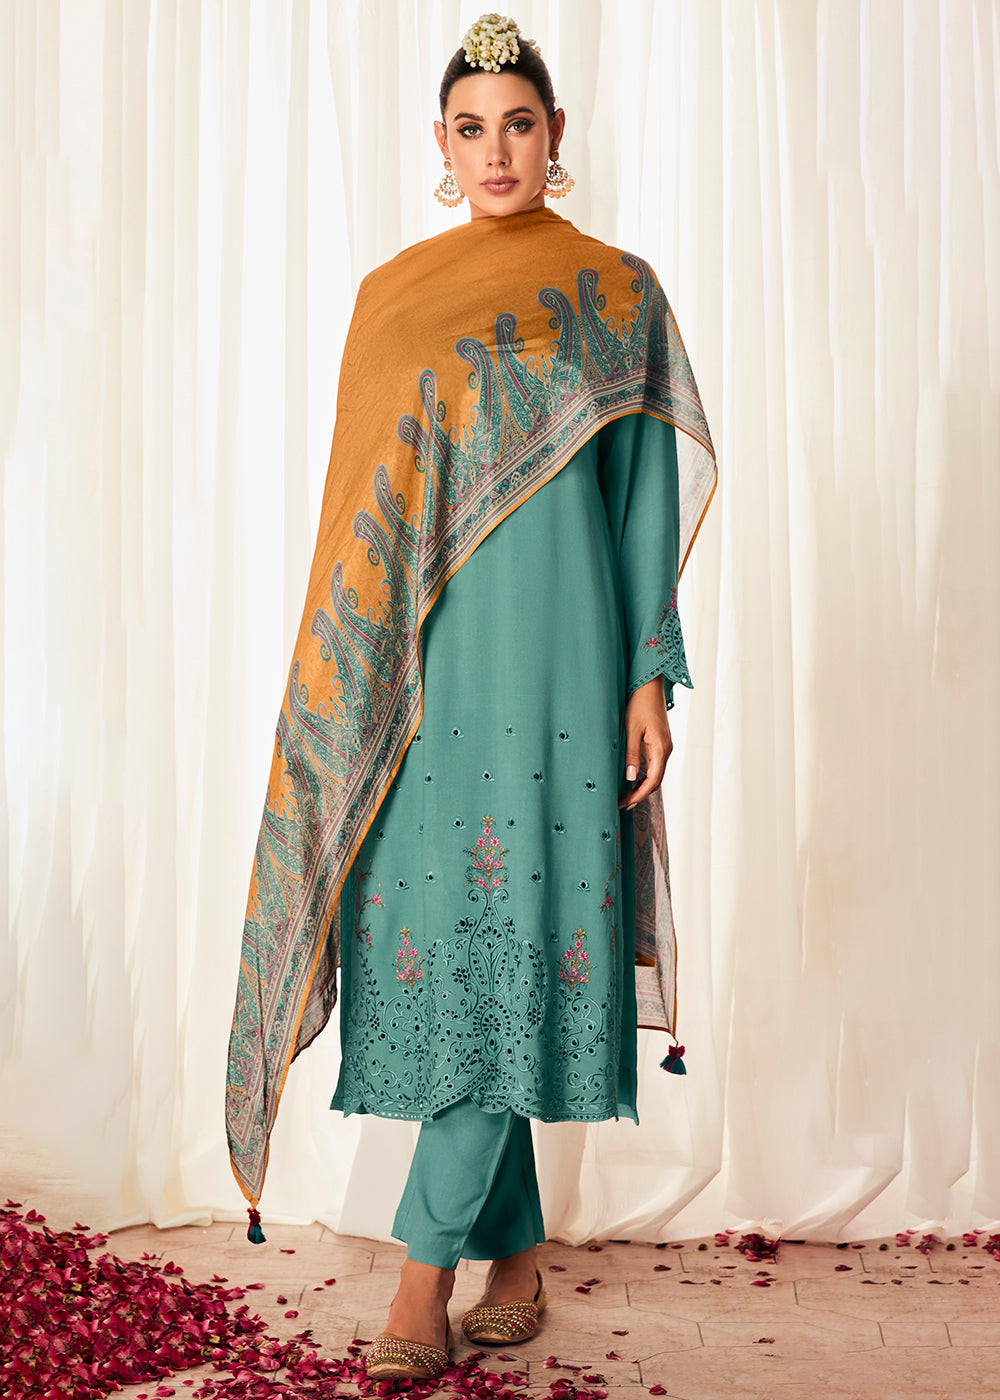 Buy Now Pleasing Turquoise Suzani Inspired Embroidered Ethnic Salwar Suit Online in USA, UK, Canada, Germany, Australia & Worldwide at Empress Clothing. 